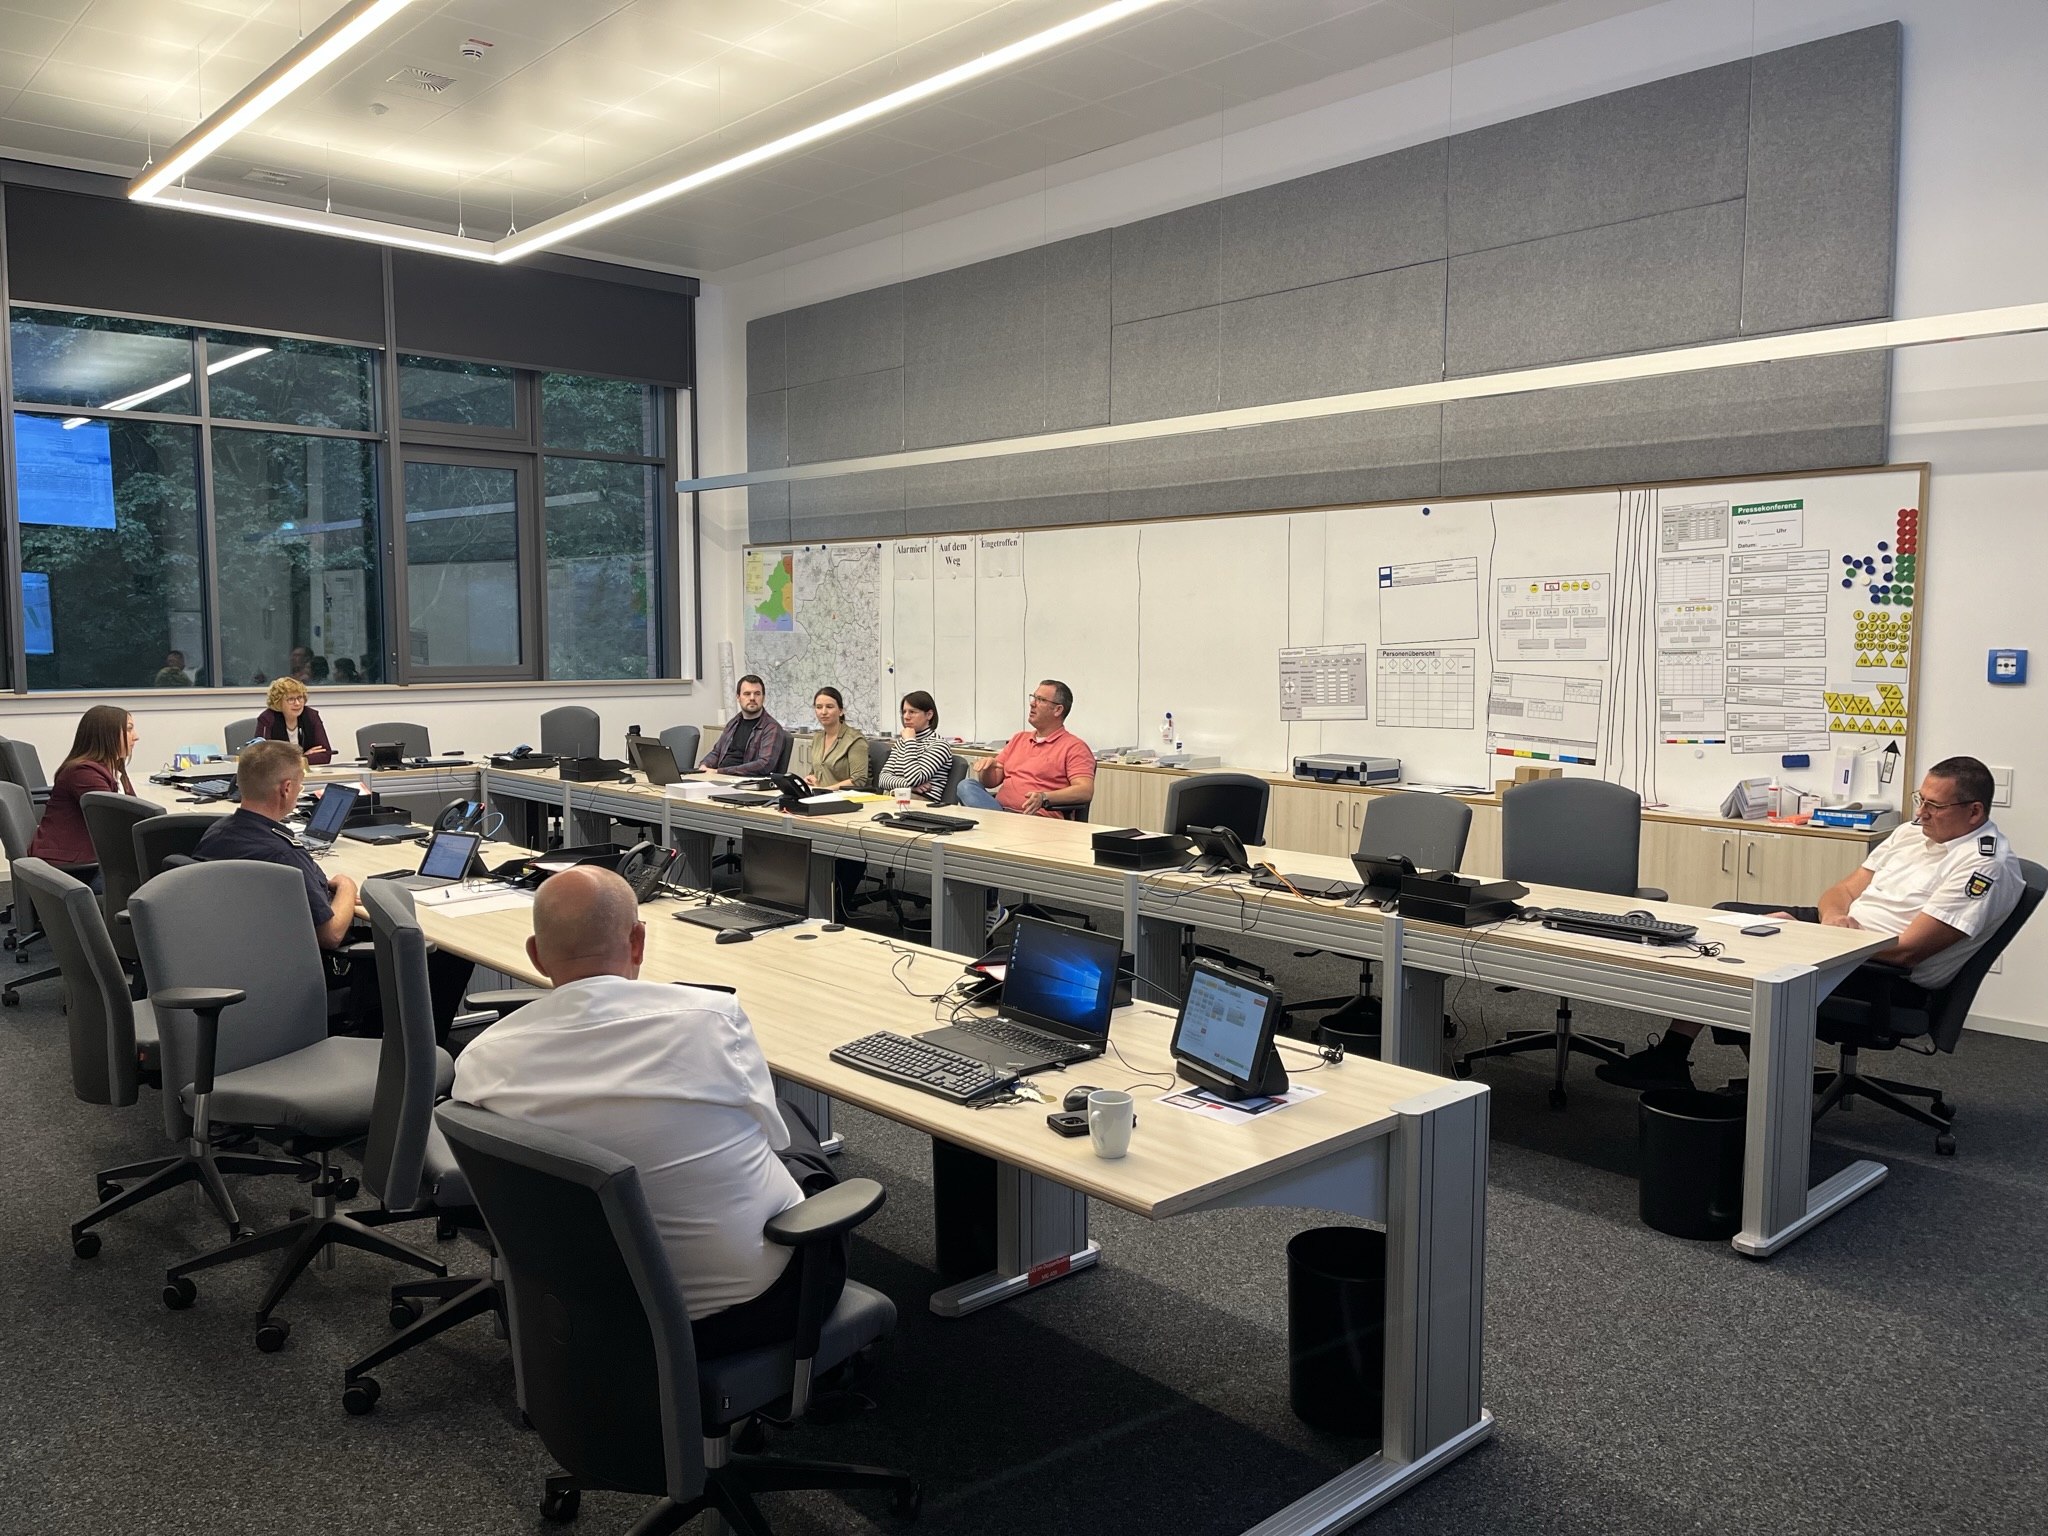 The Borken district takes part in the BGZ's emergency preparedness exercise at the interim storage facility in Ahaus - aim: coordination of the district's processes and plans